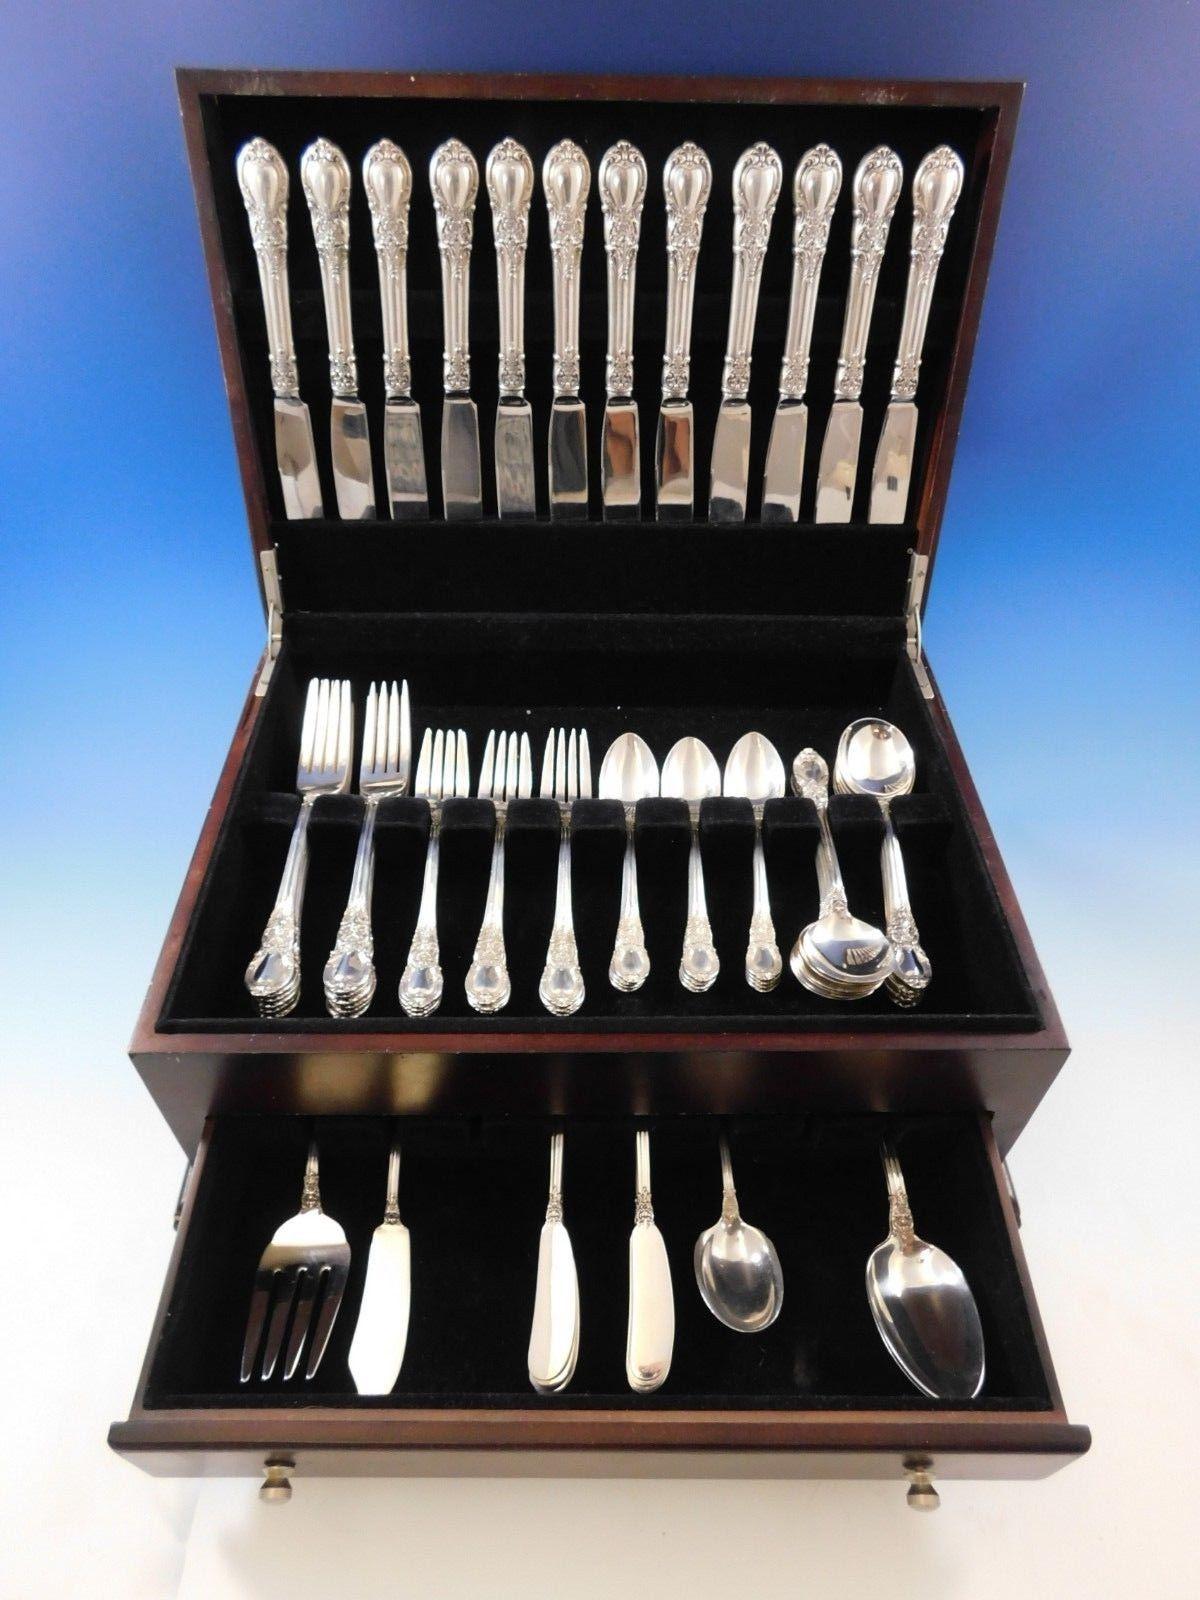 Lovely dinner size American Victorian by Lunt silver flatware set, 77 pieces. This set includes:

12 dinner knives, 9 1/2